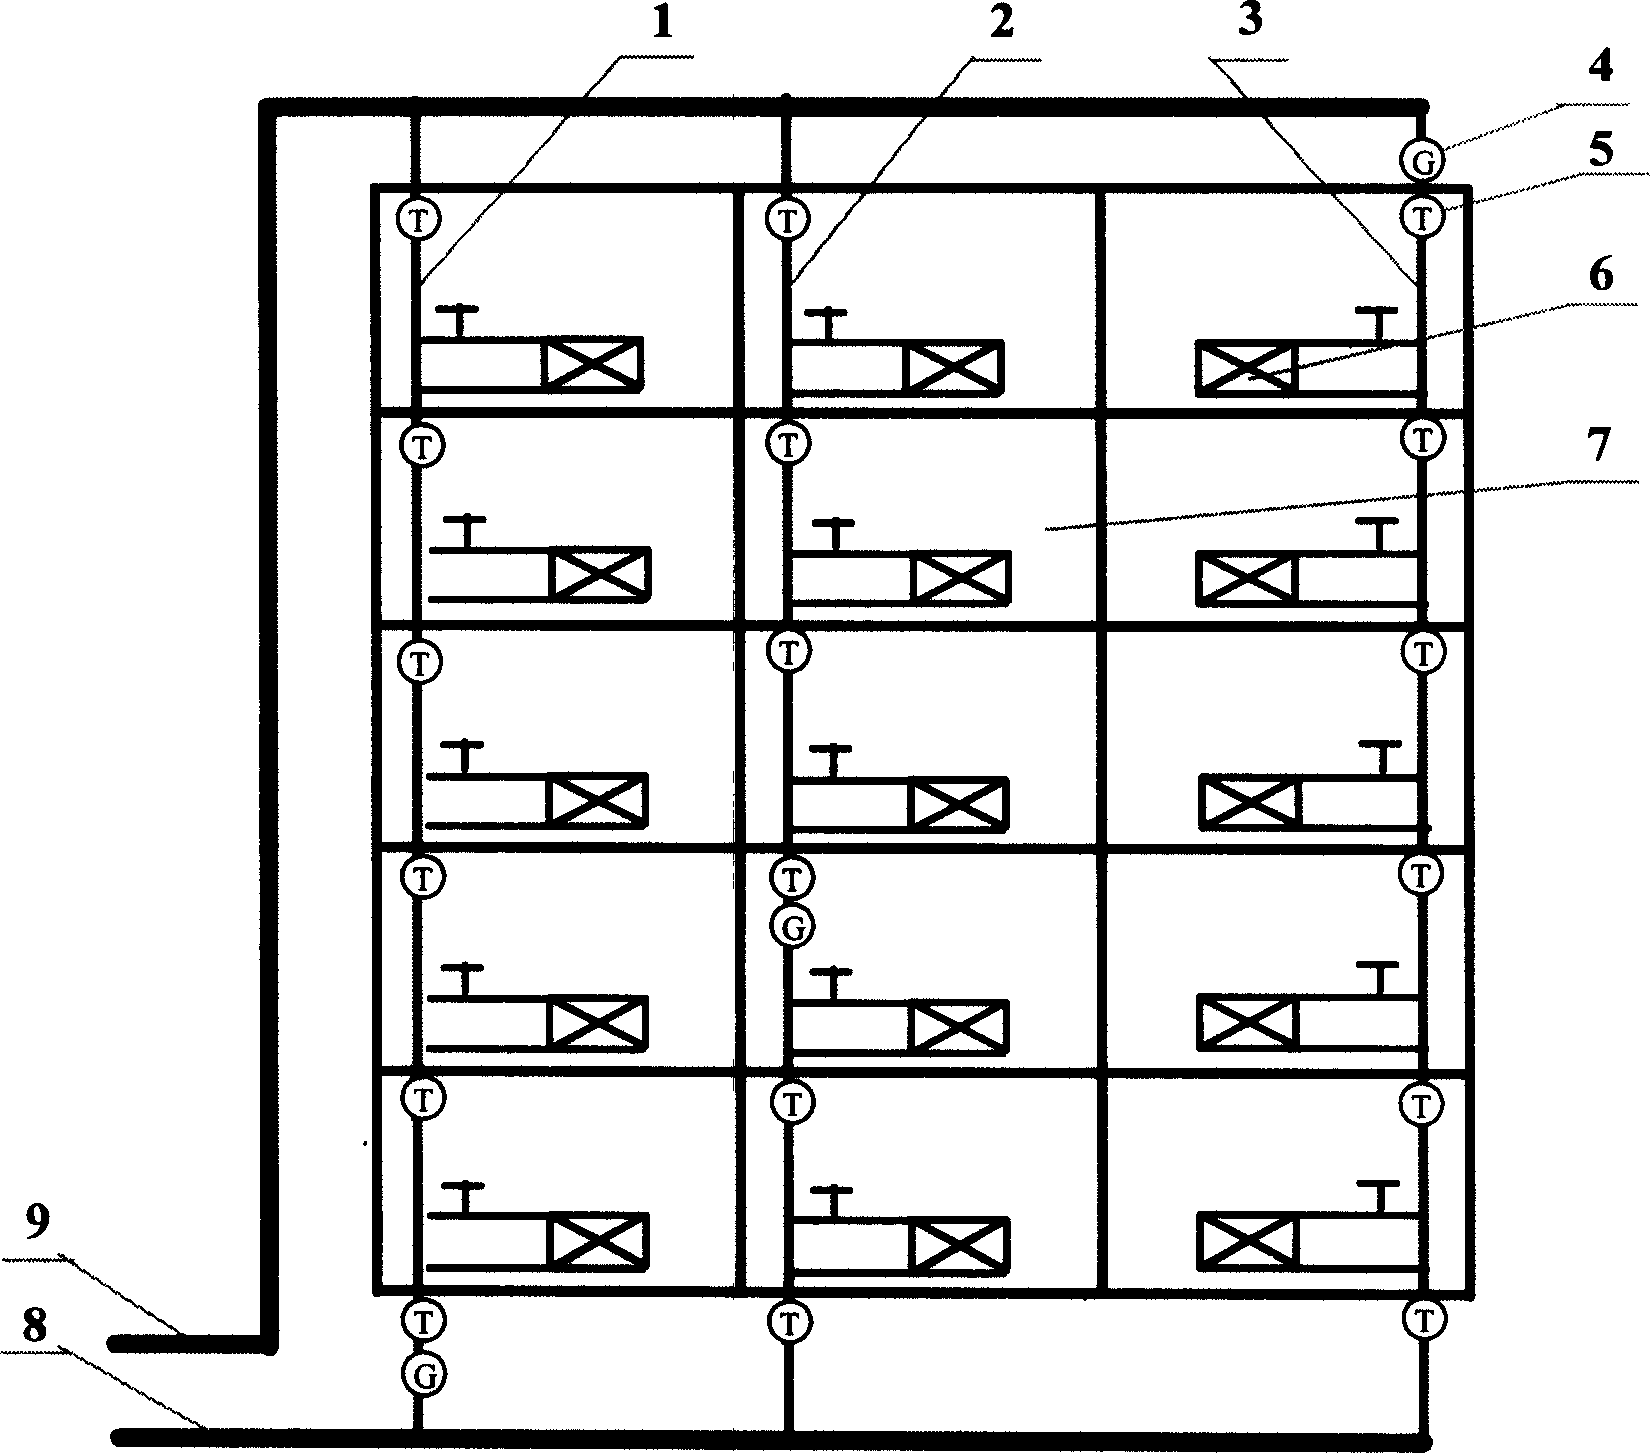 Heat metering method for open-ring central heating system